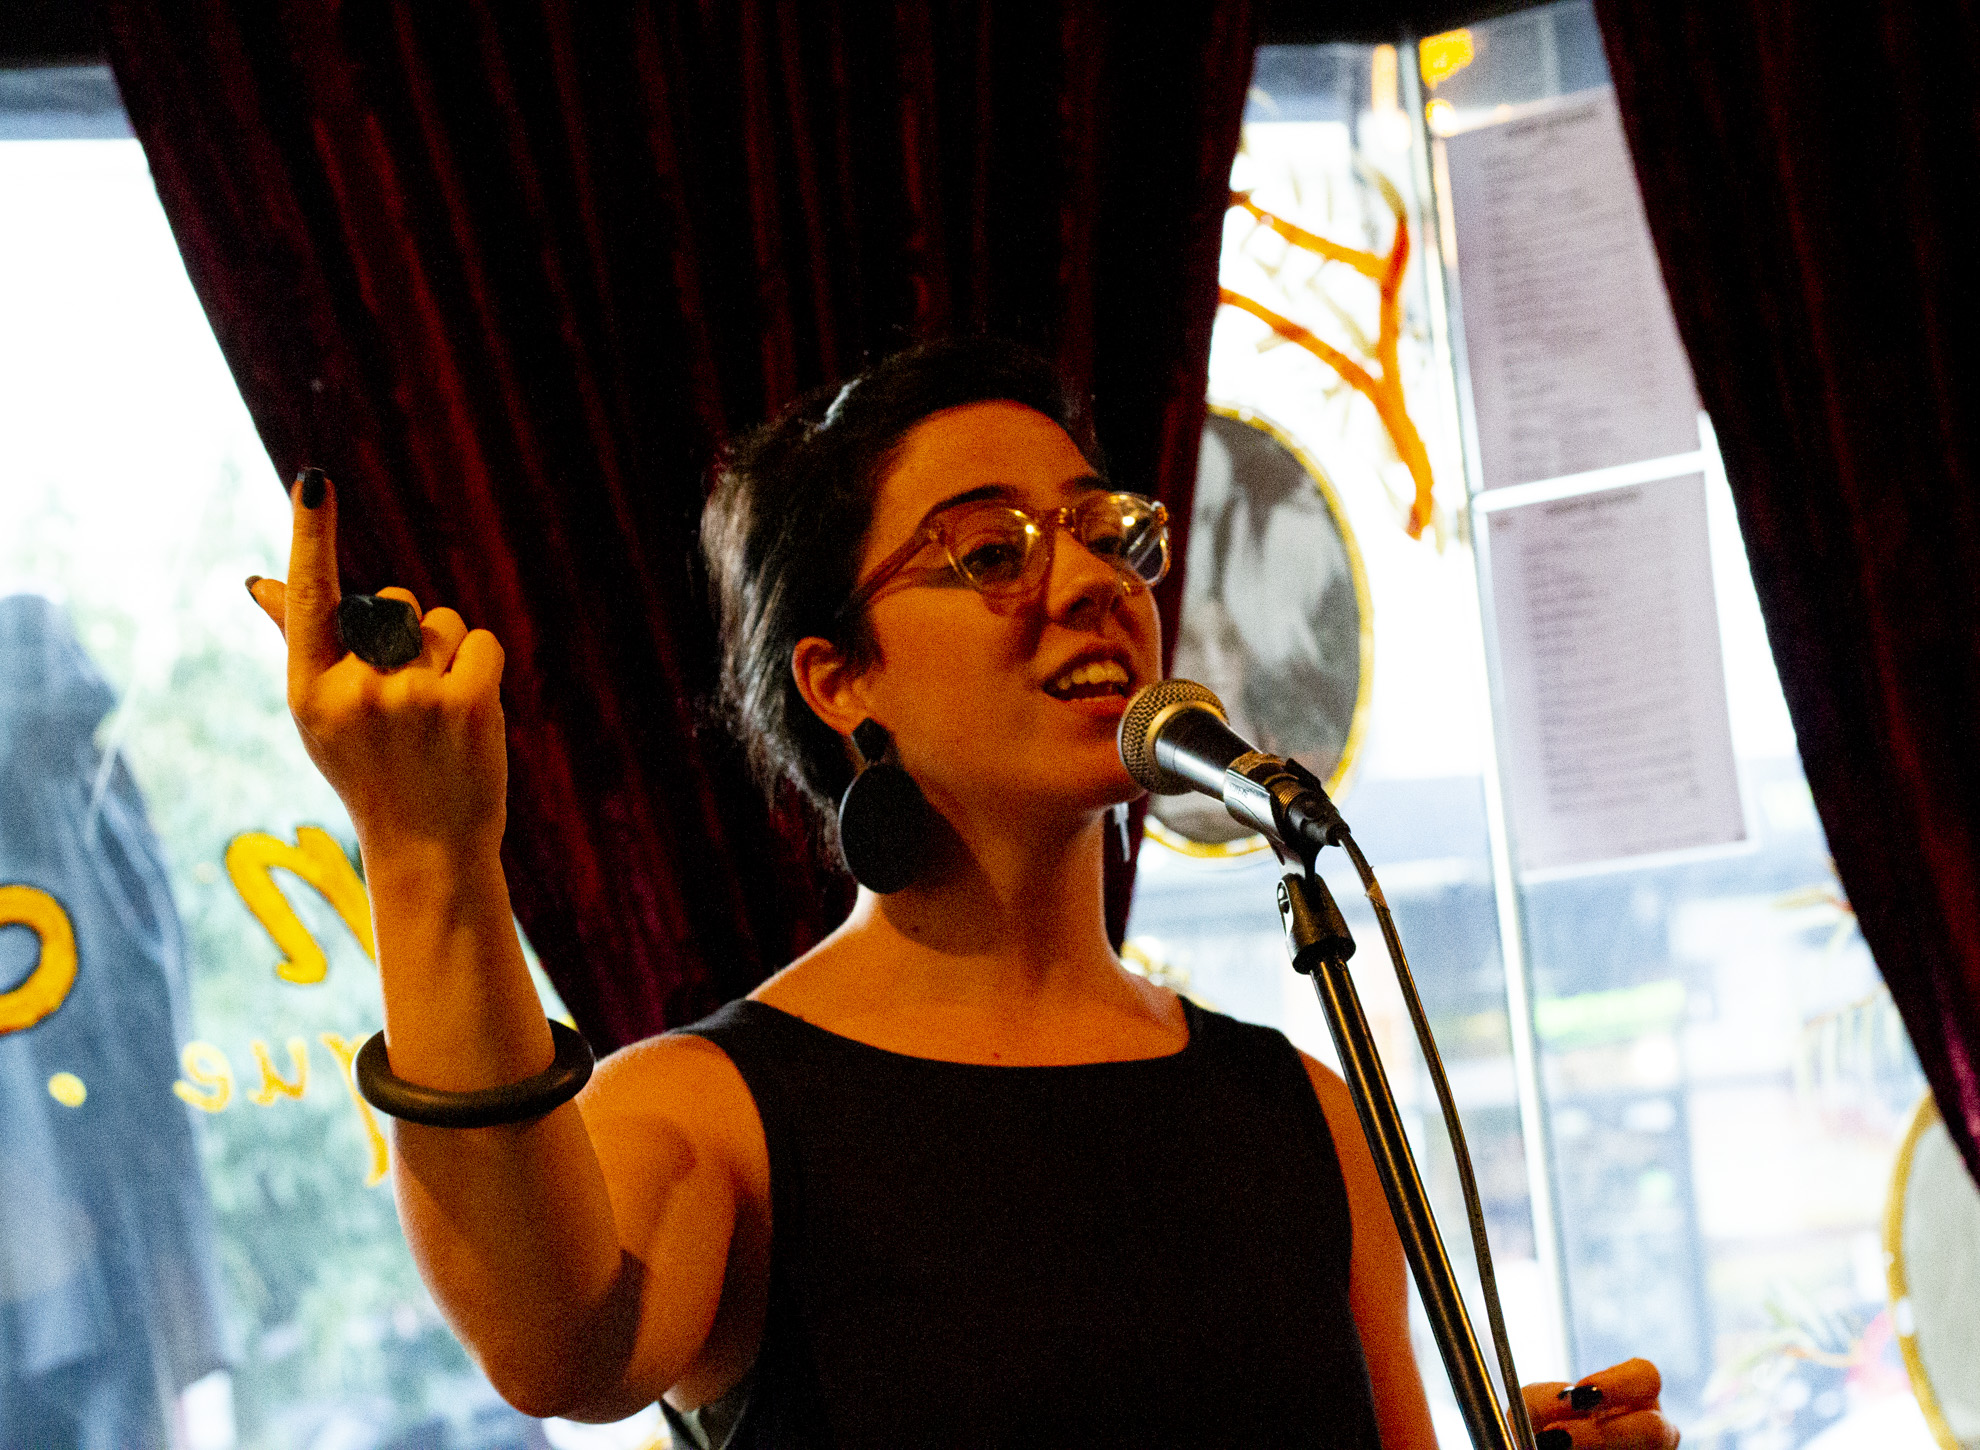 Ren Alessandra, young woman speaking live behind a microphone, one hand gesturing expressively